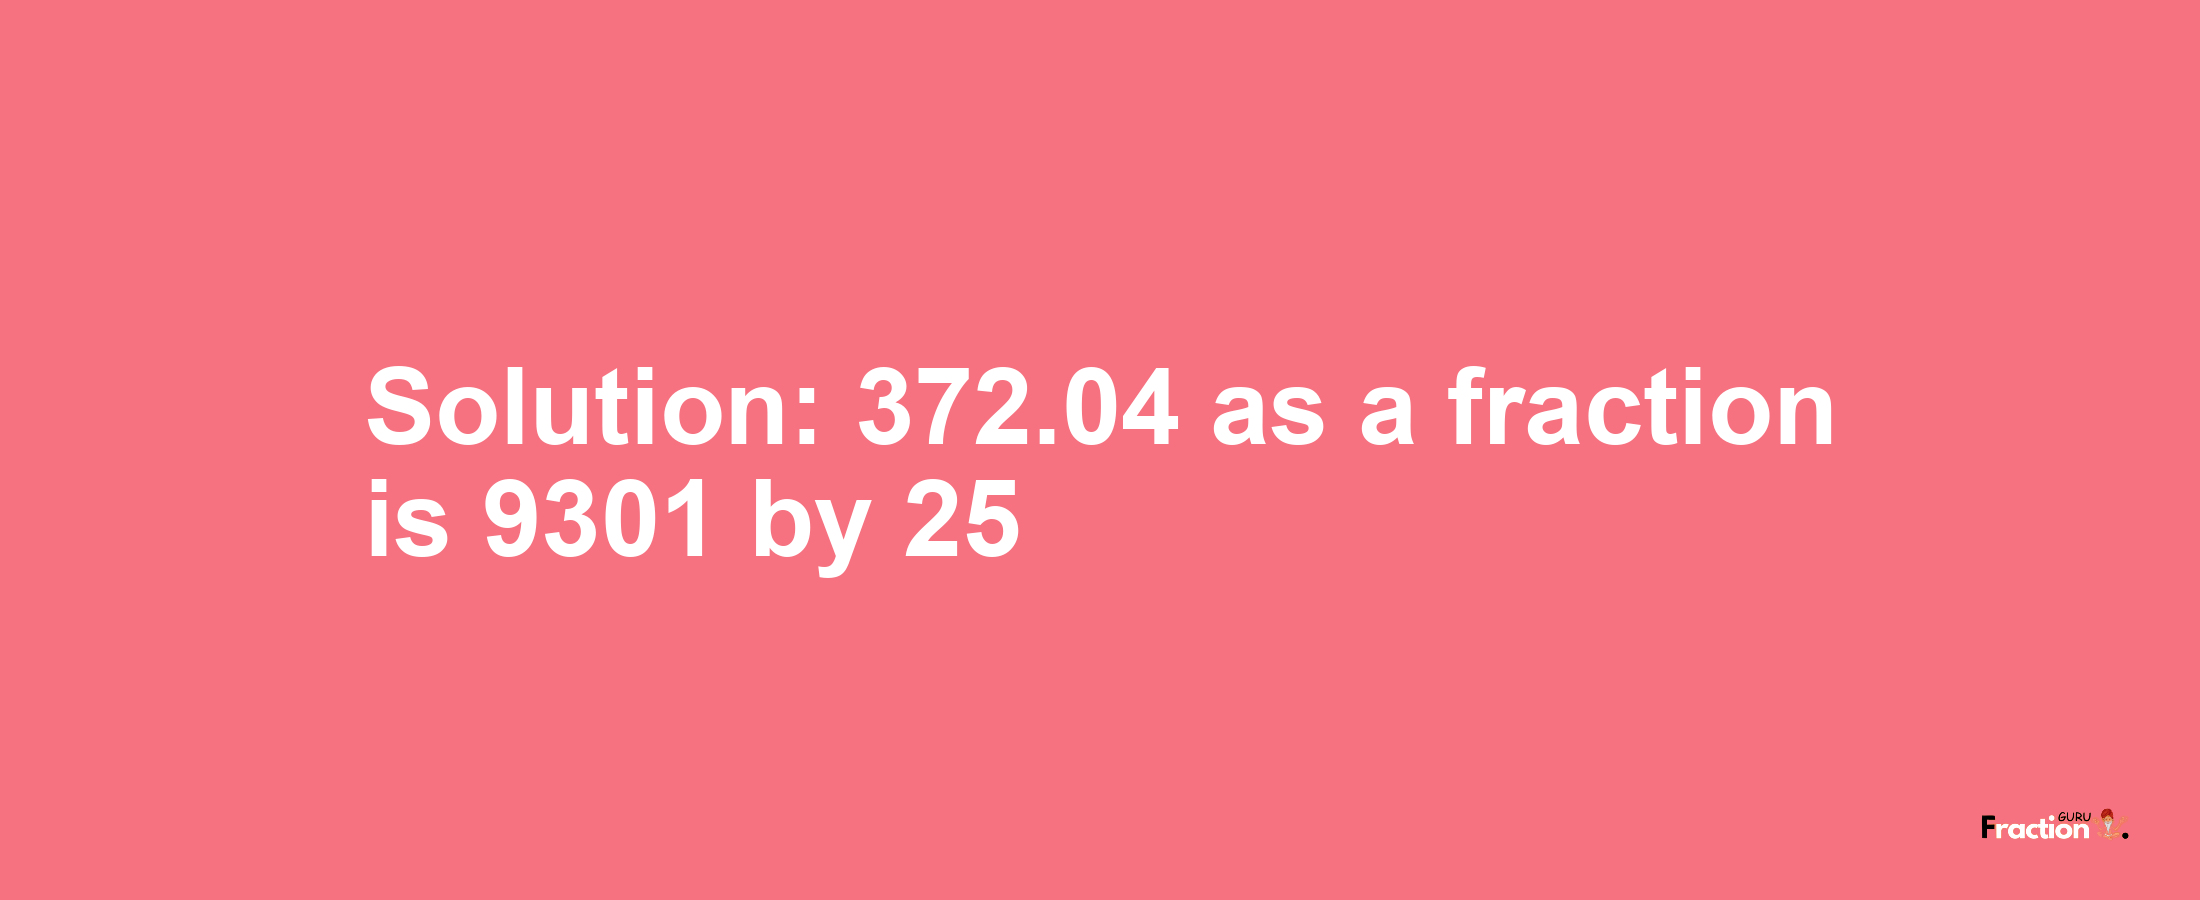 Solution:372.04 as a fraction is 9301/25